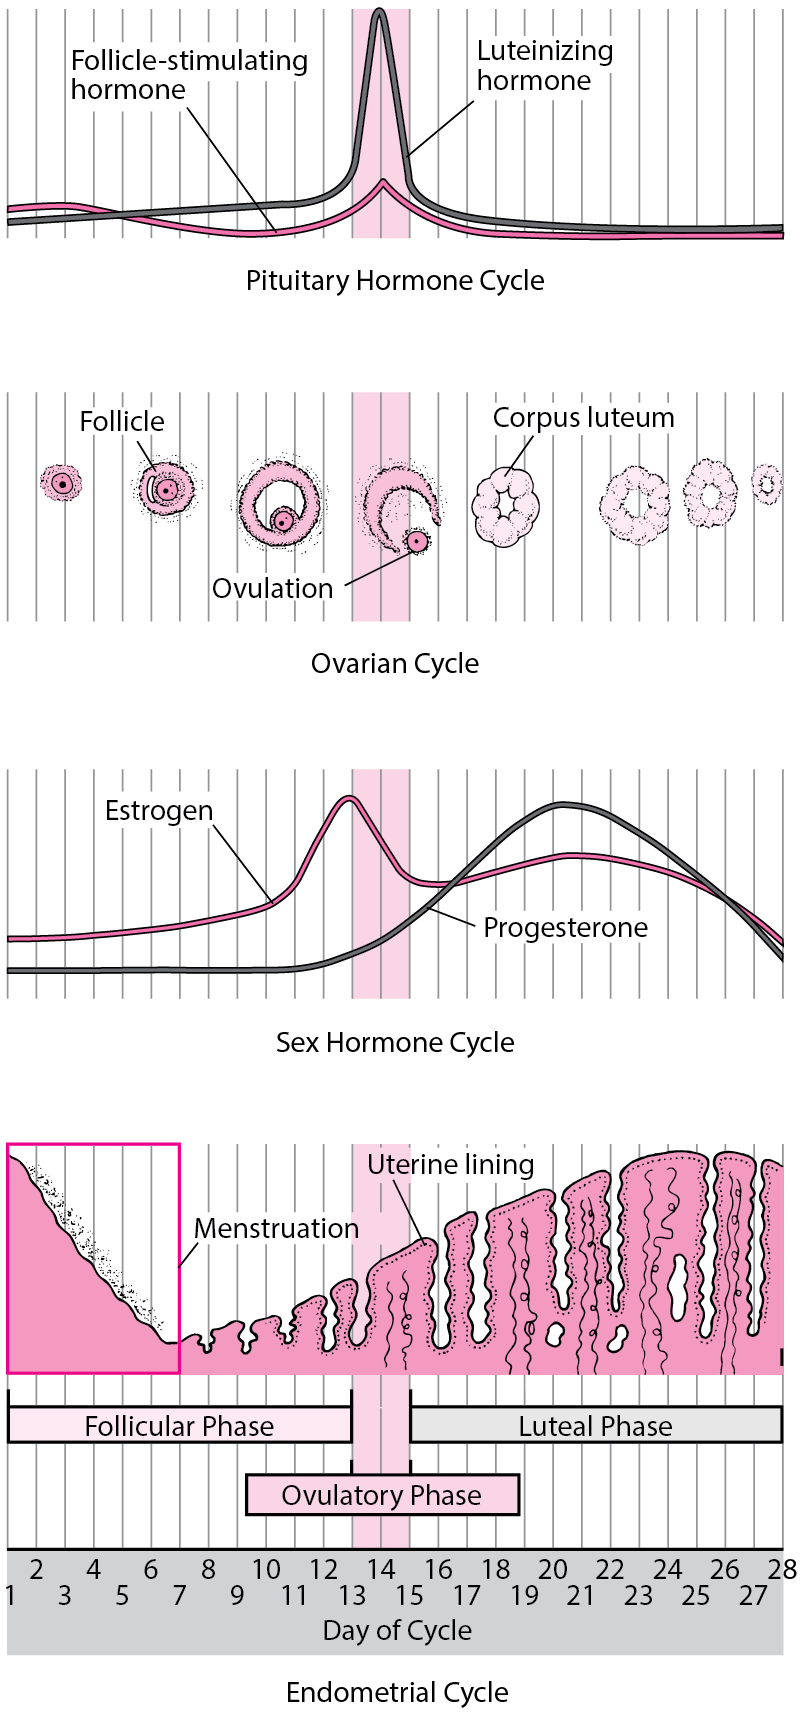 Changes During the Menstrual Cycle